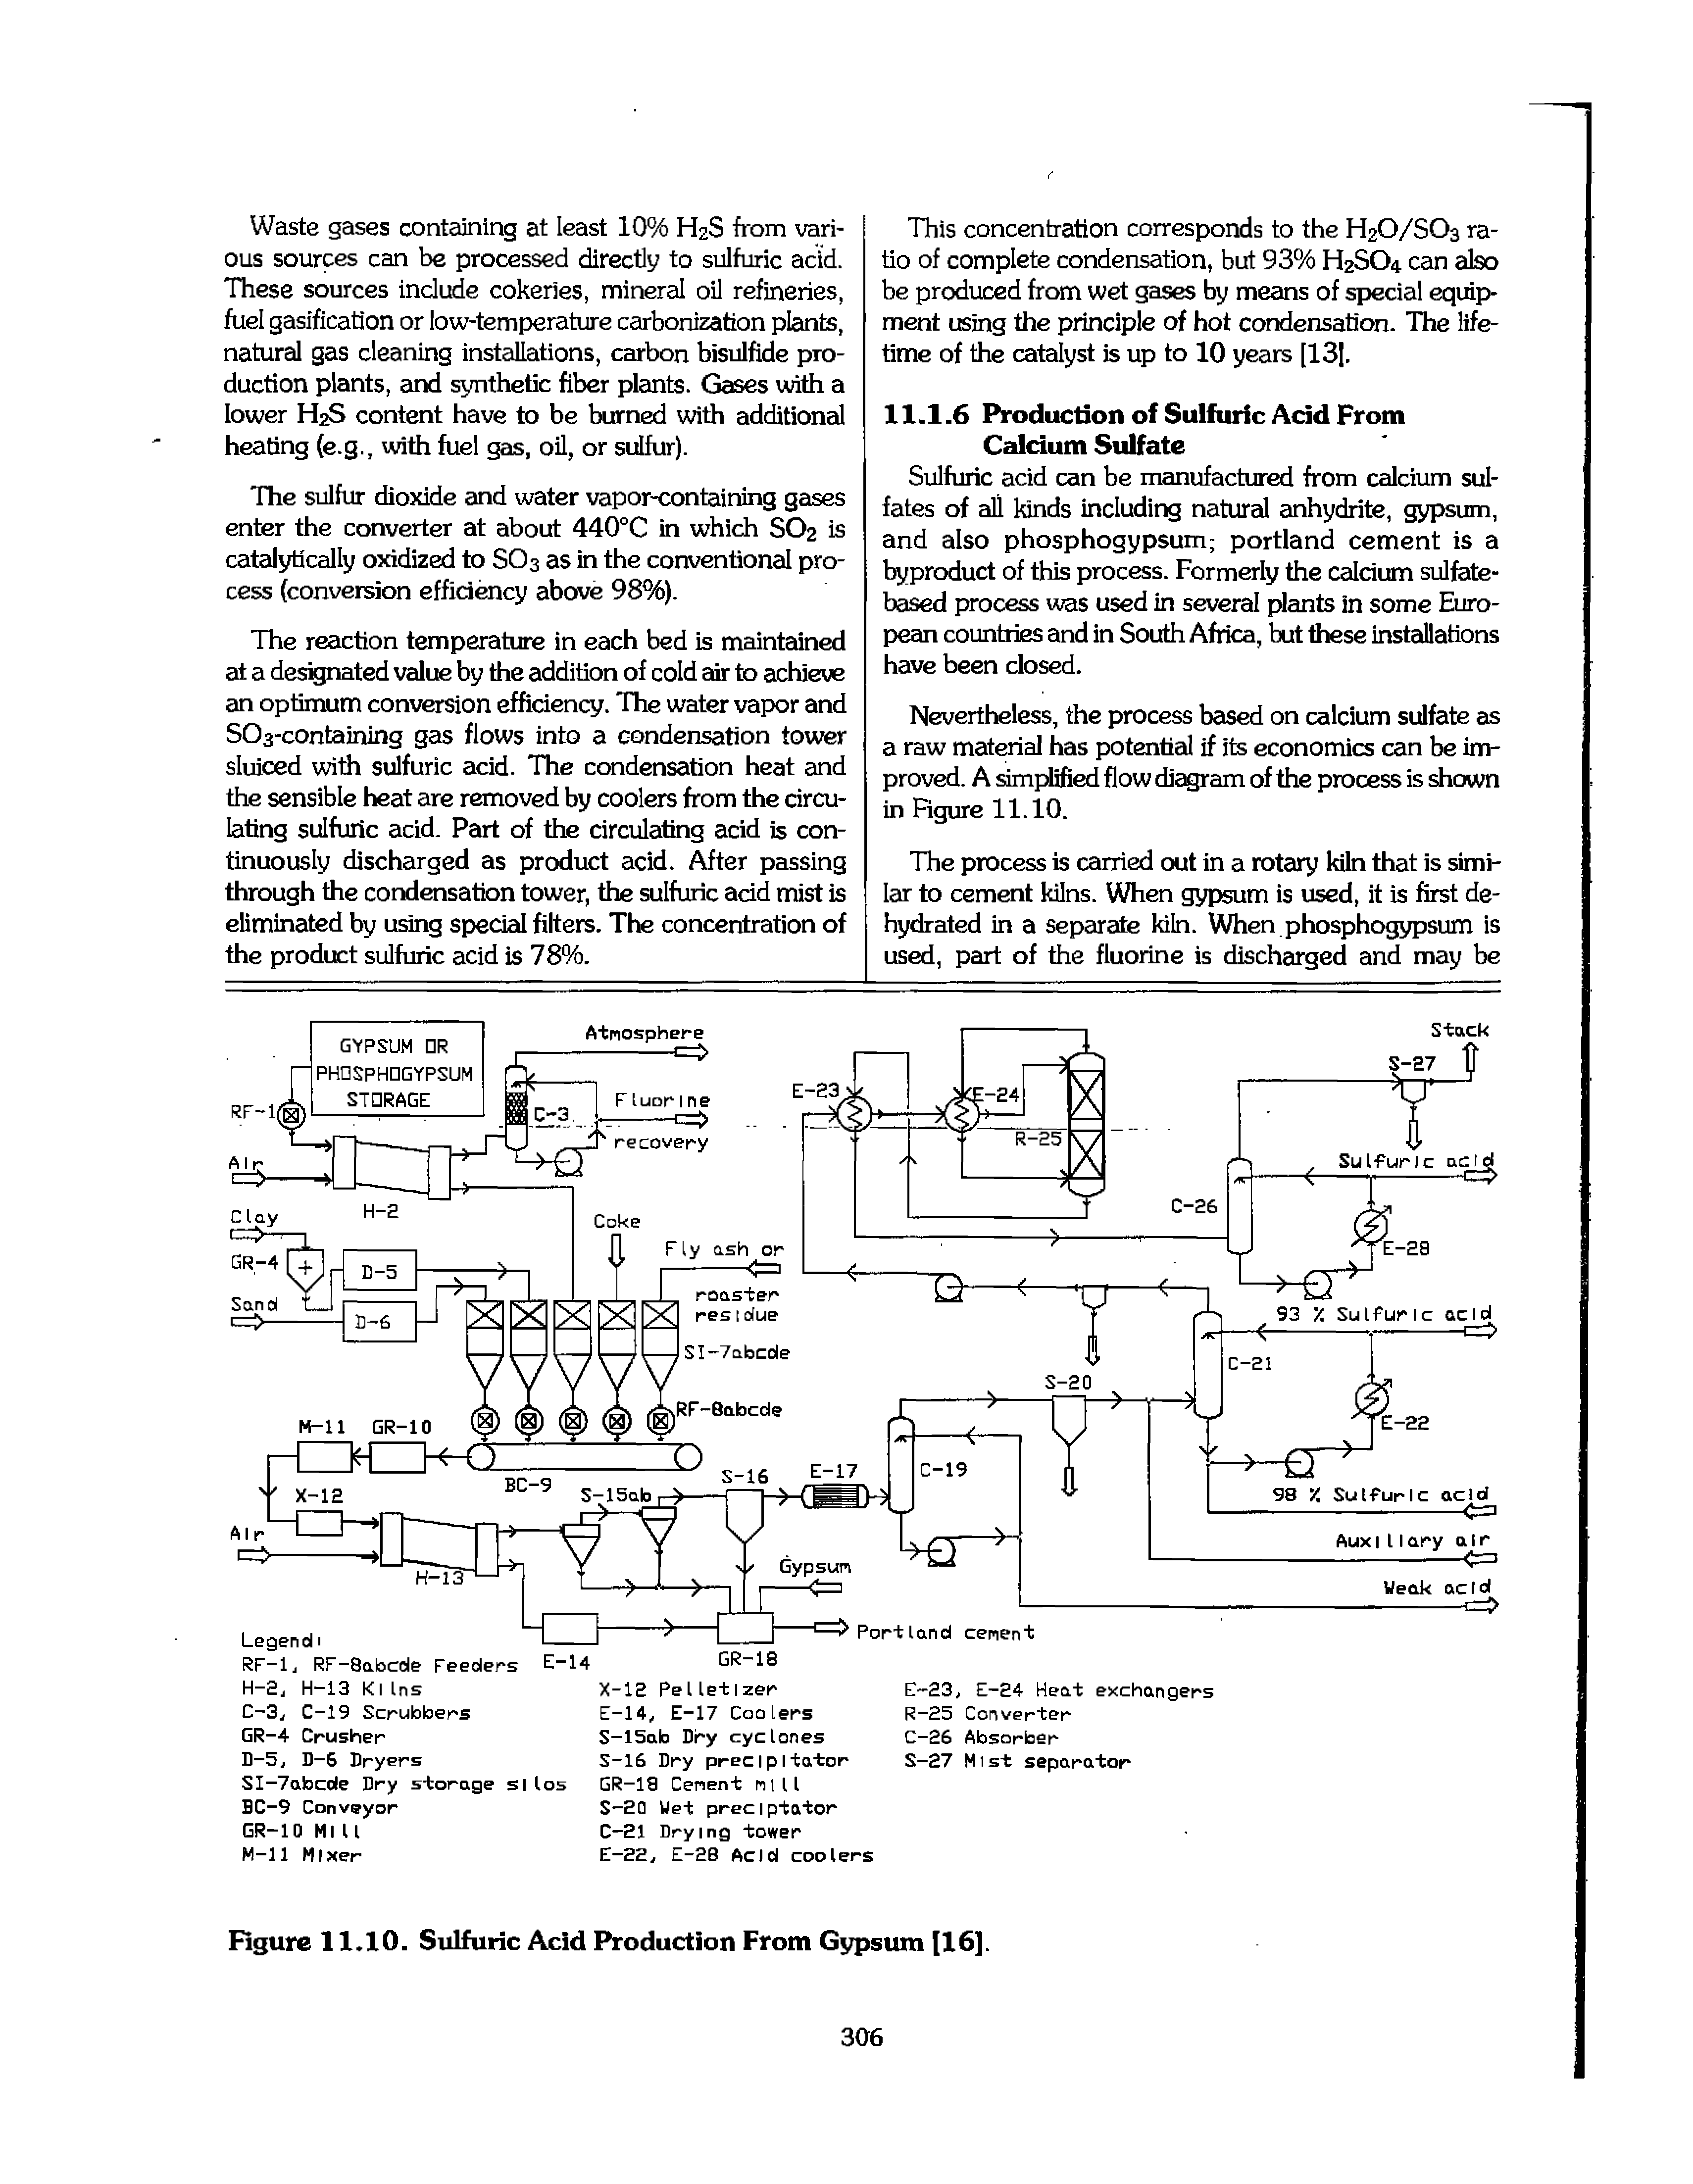 Figure 11.10. Sulfuric Acid Production From Gypsum [16].